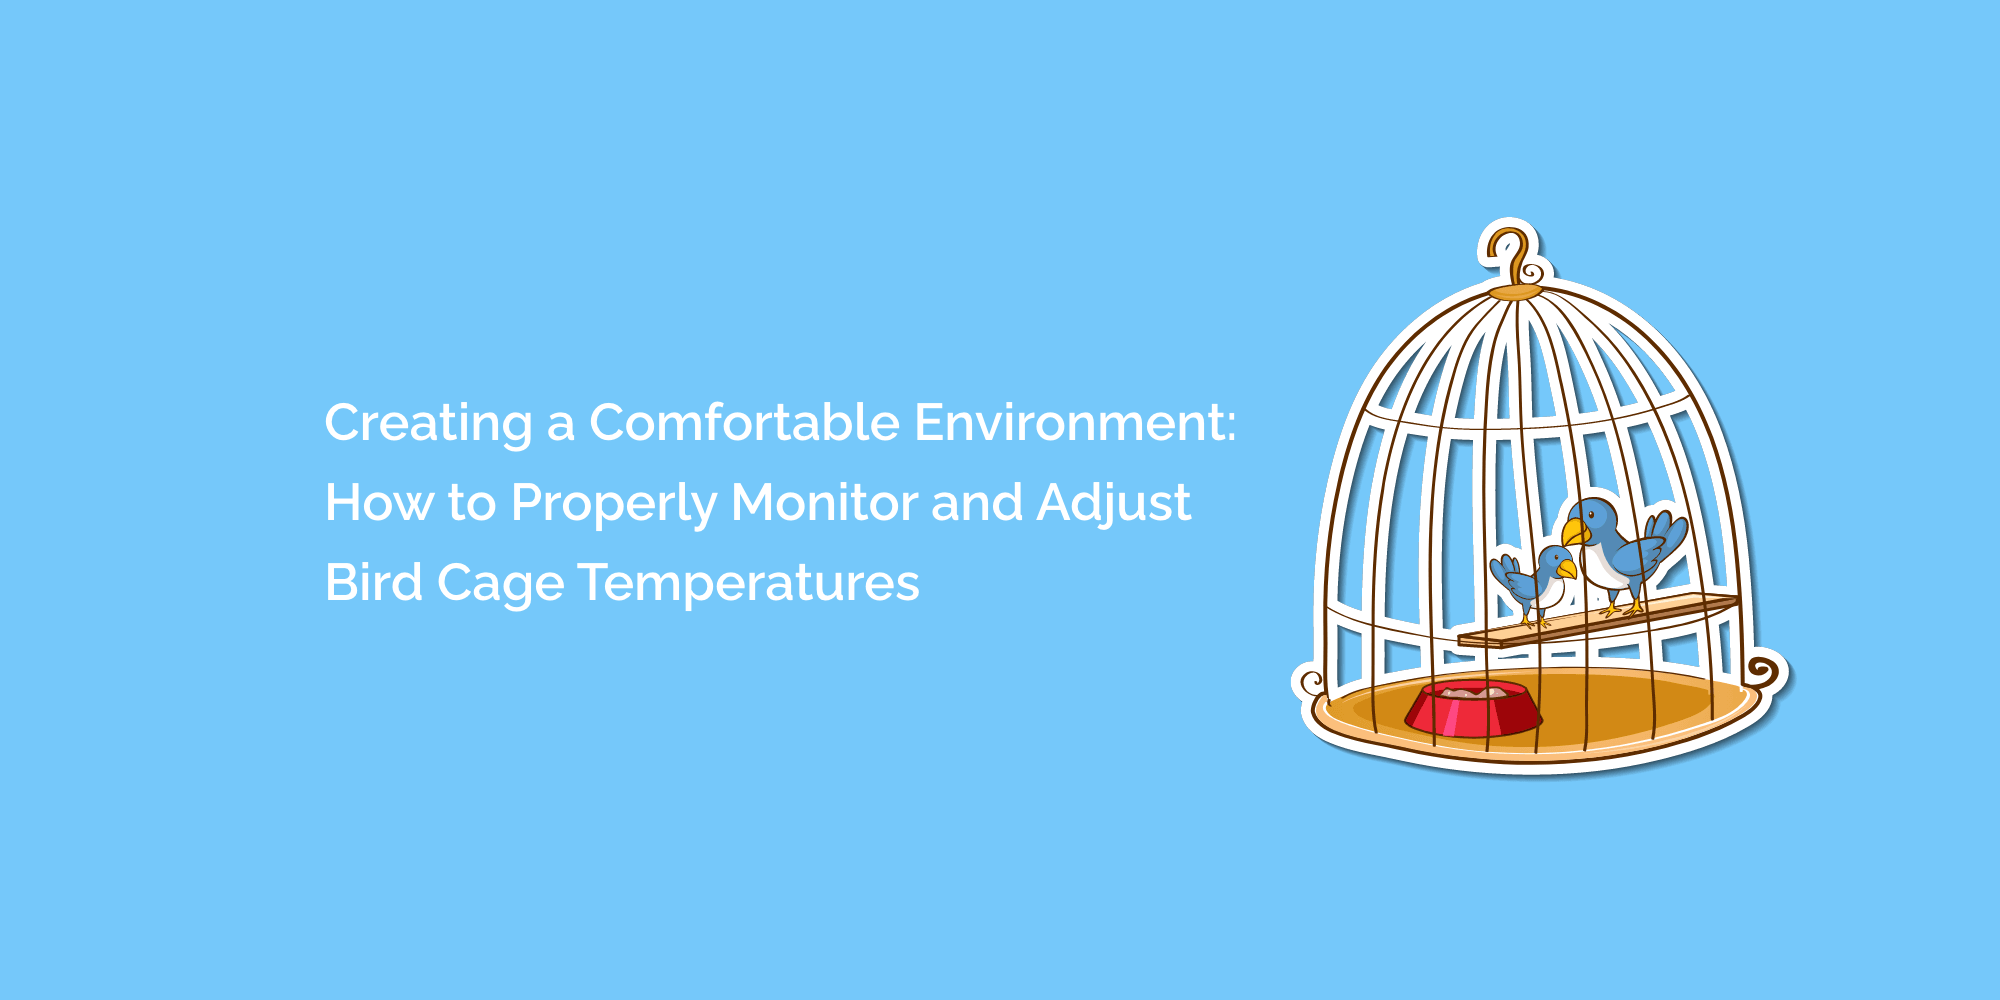 Creating a Comfortable Environment: How to Properly Monitor and Adjust Bird Cage Temperatures